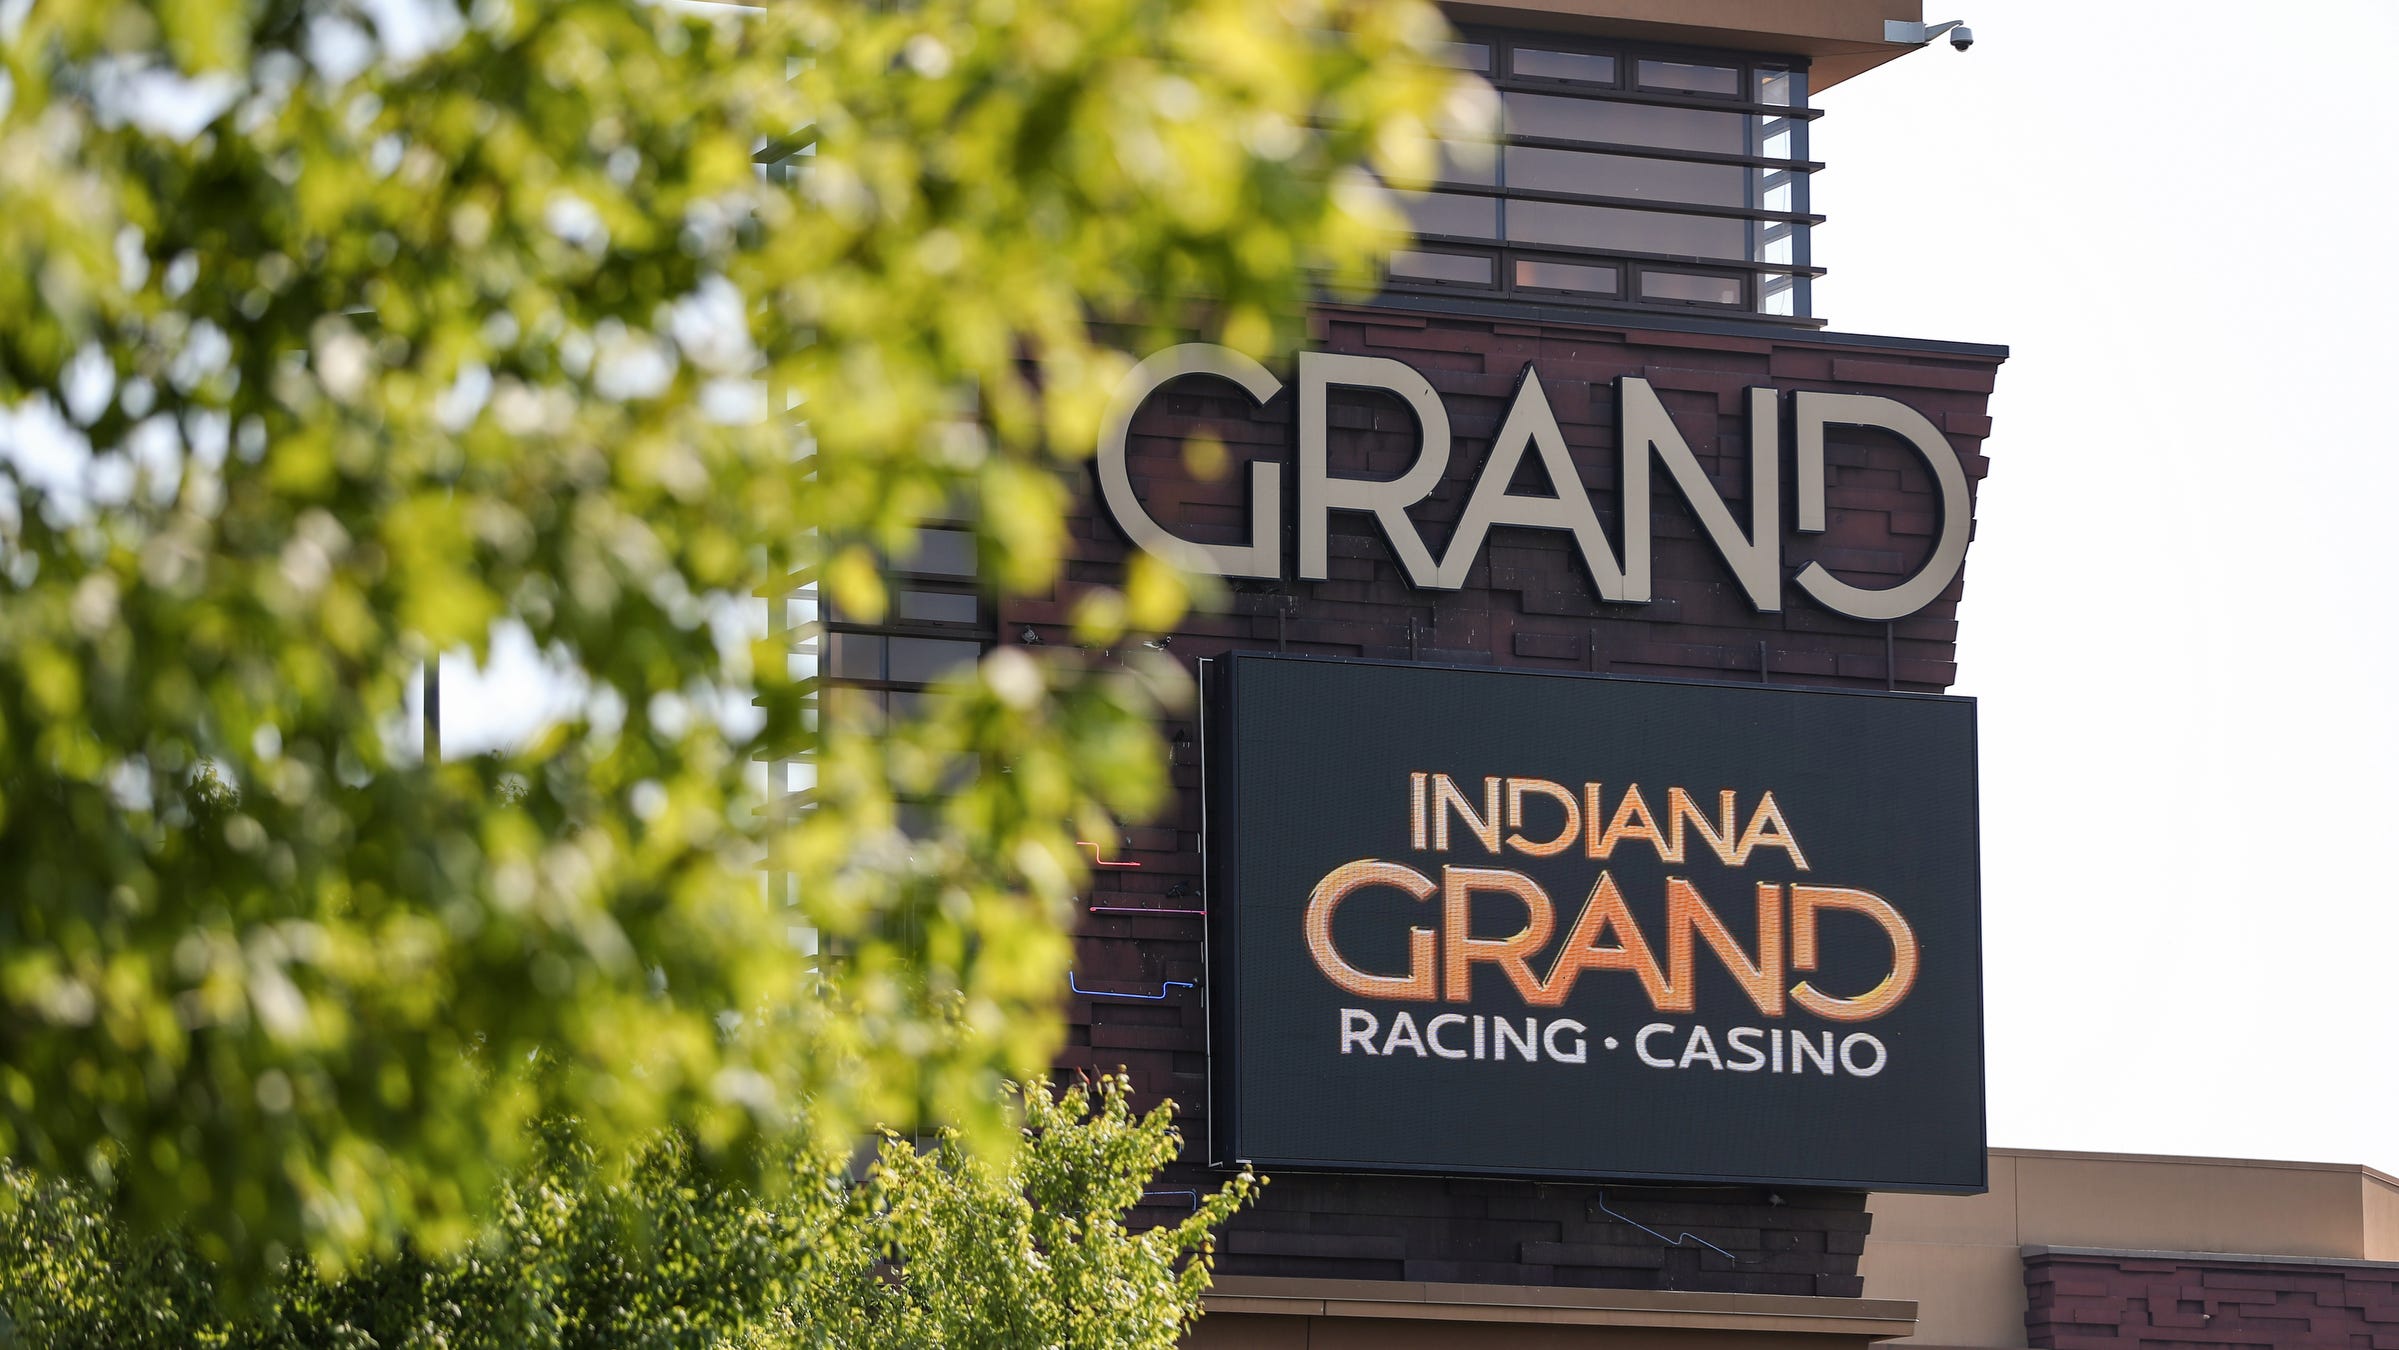 To Main Event, WSOP will Give Pathway at Indiana Grand